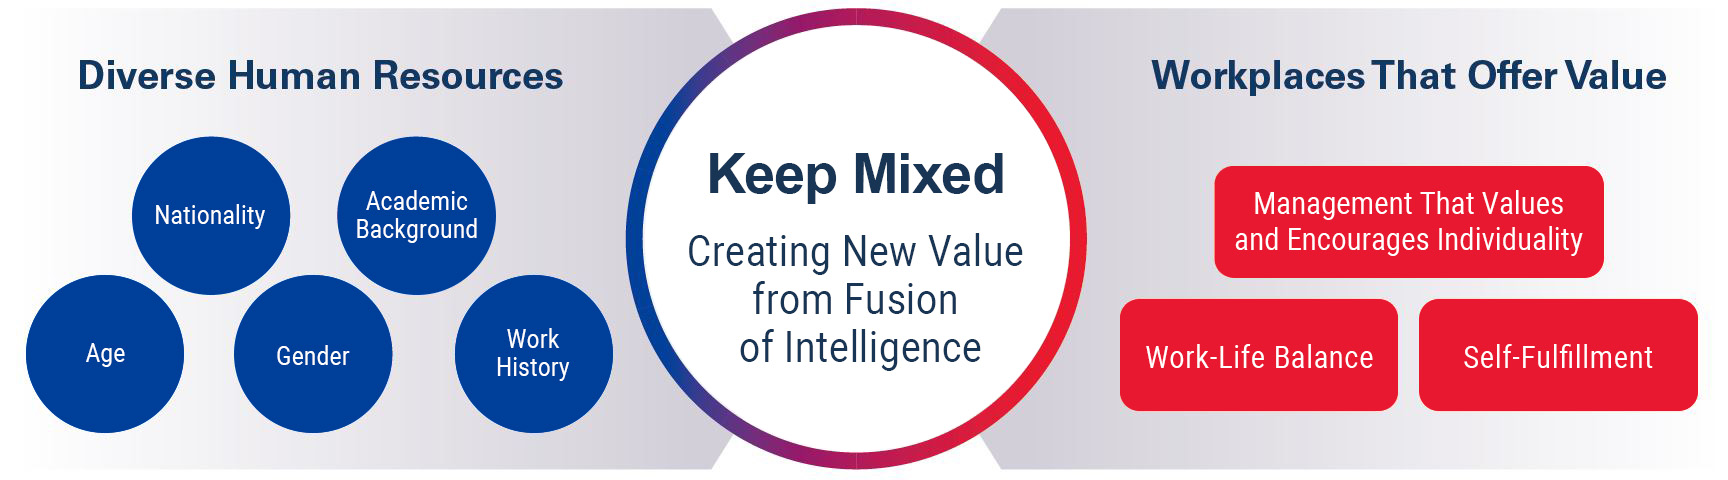 Keep Mixed Creating New Value from Fusion of Intelligence